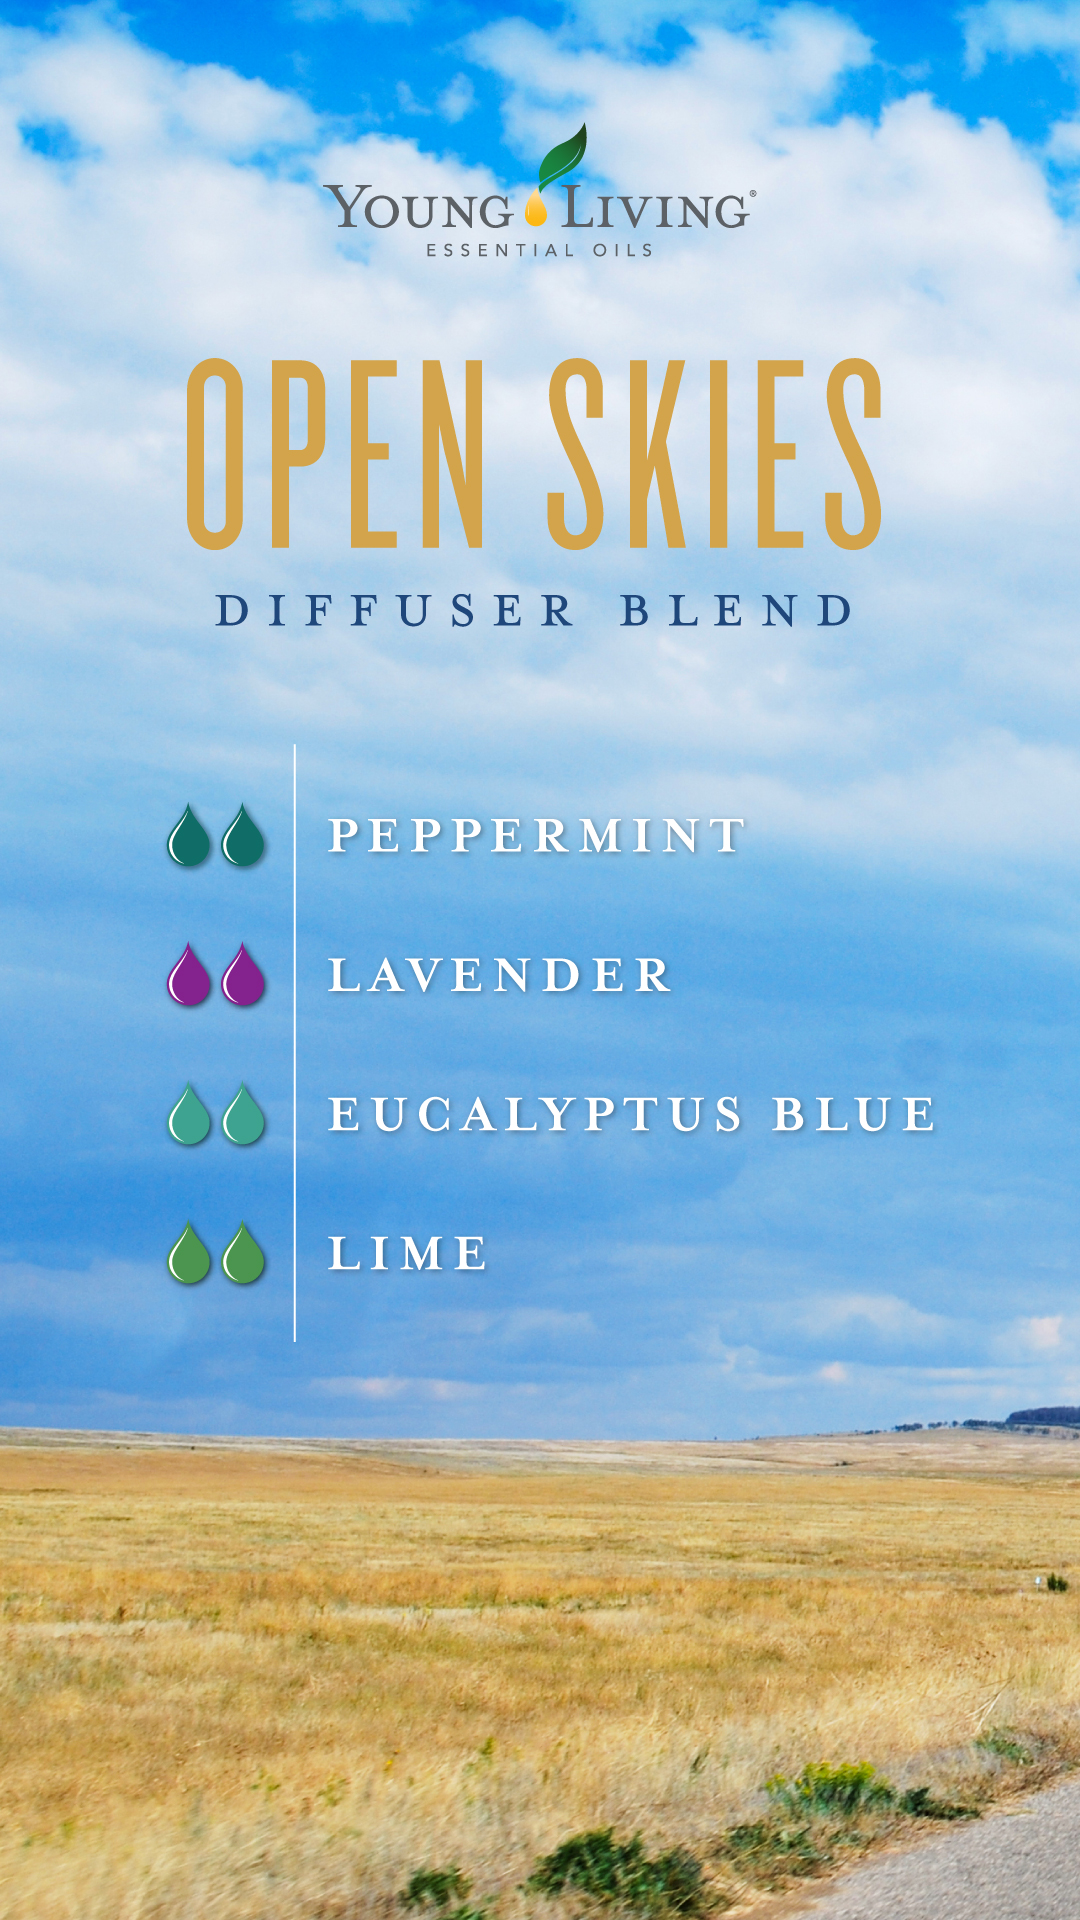 Open Skies essential oil diffuser blend by young living essential oils